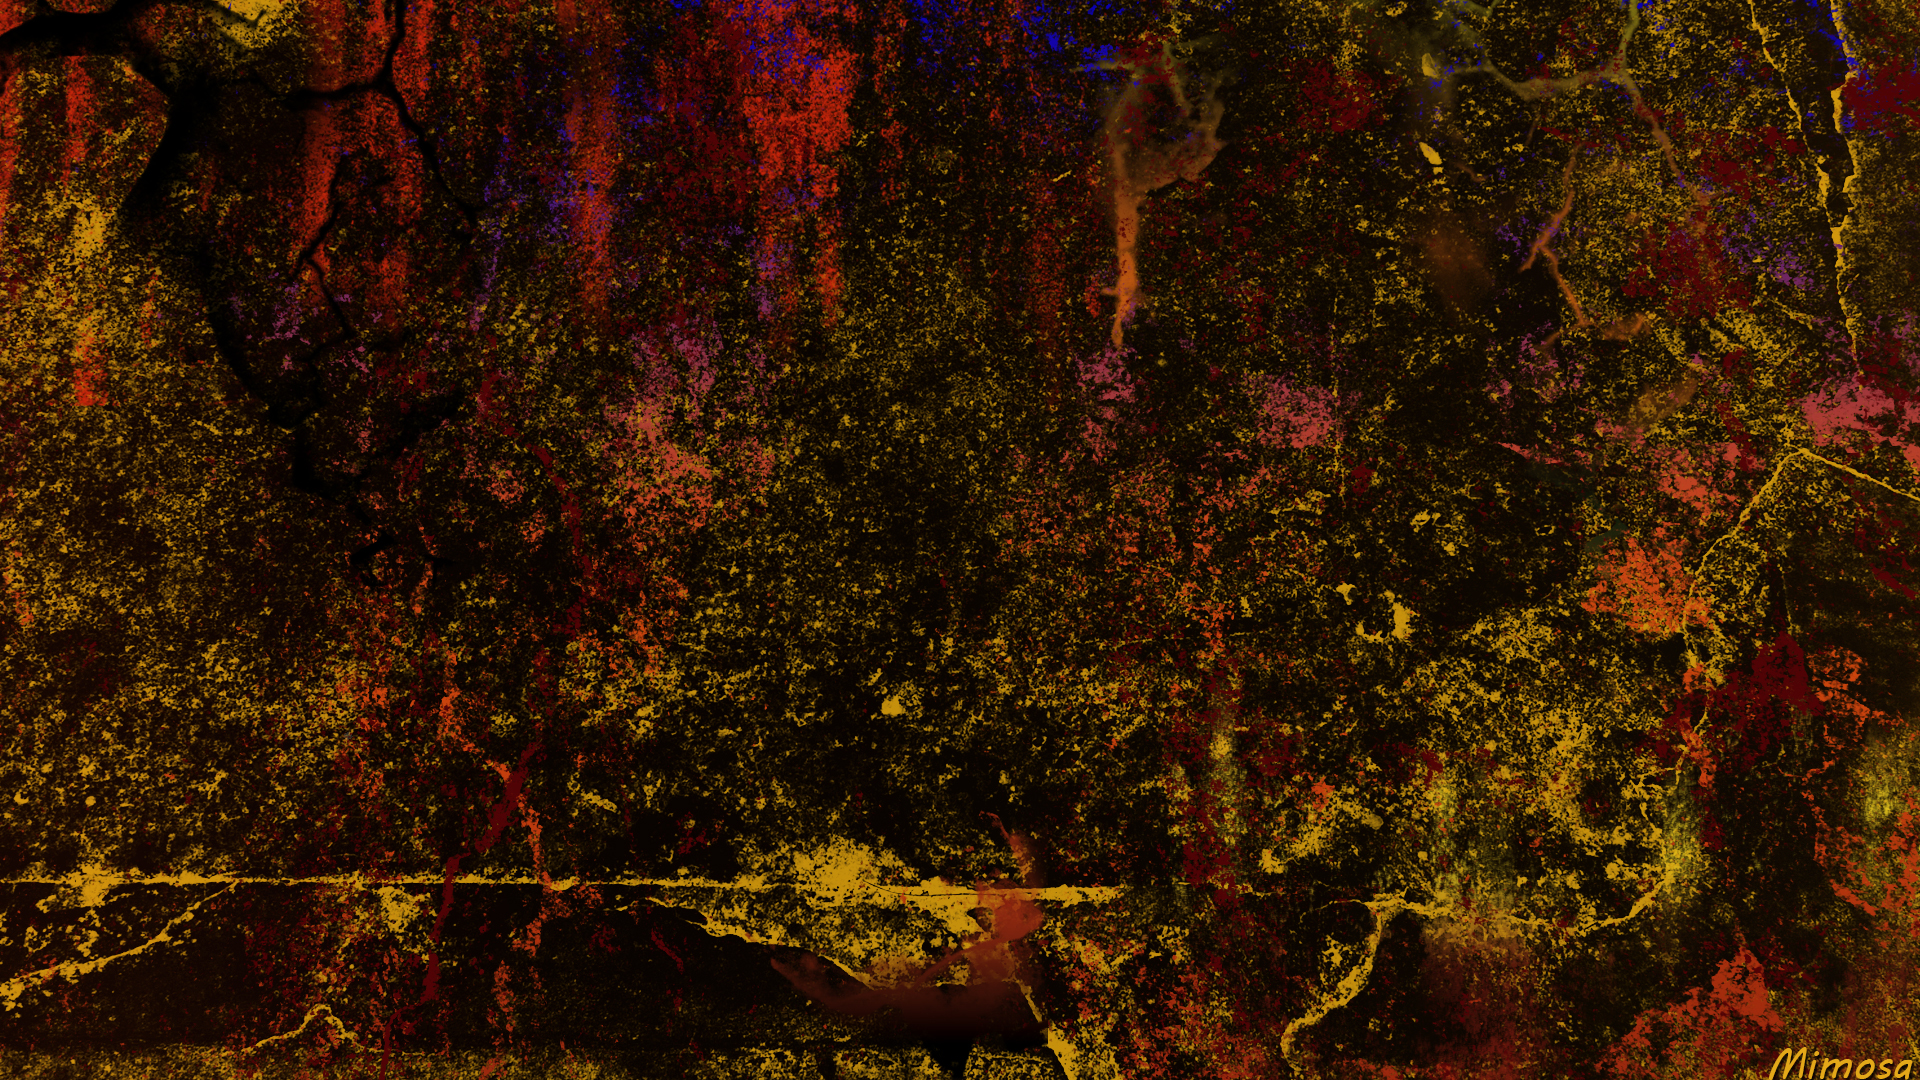 Abstract Artistic Colors Digital Art Grunge 1920x1080